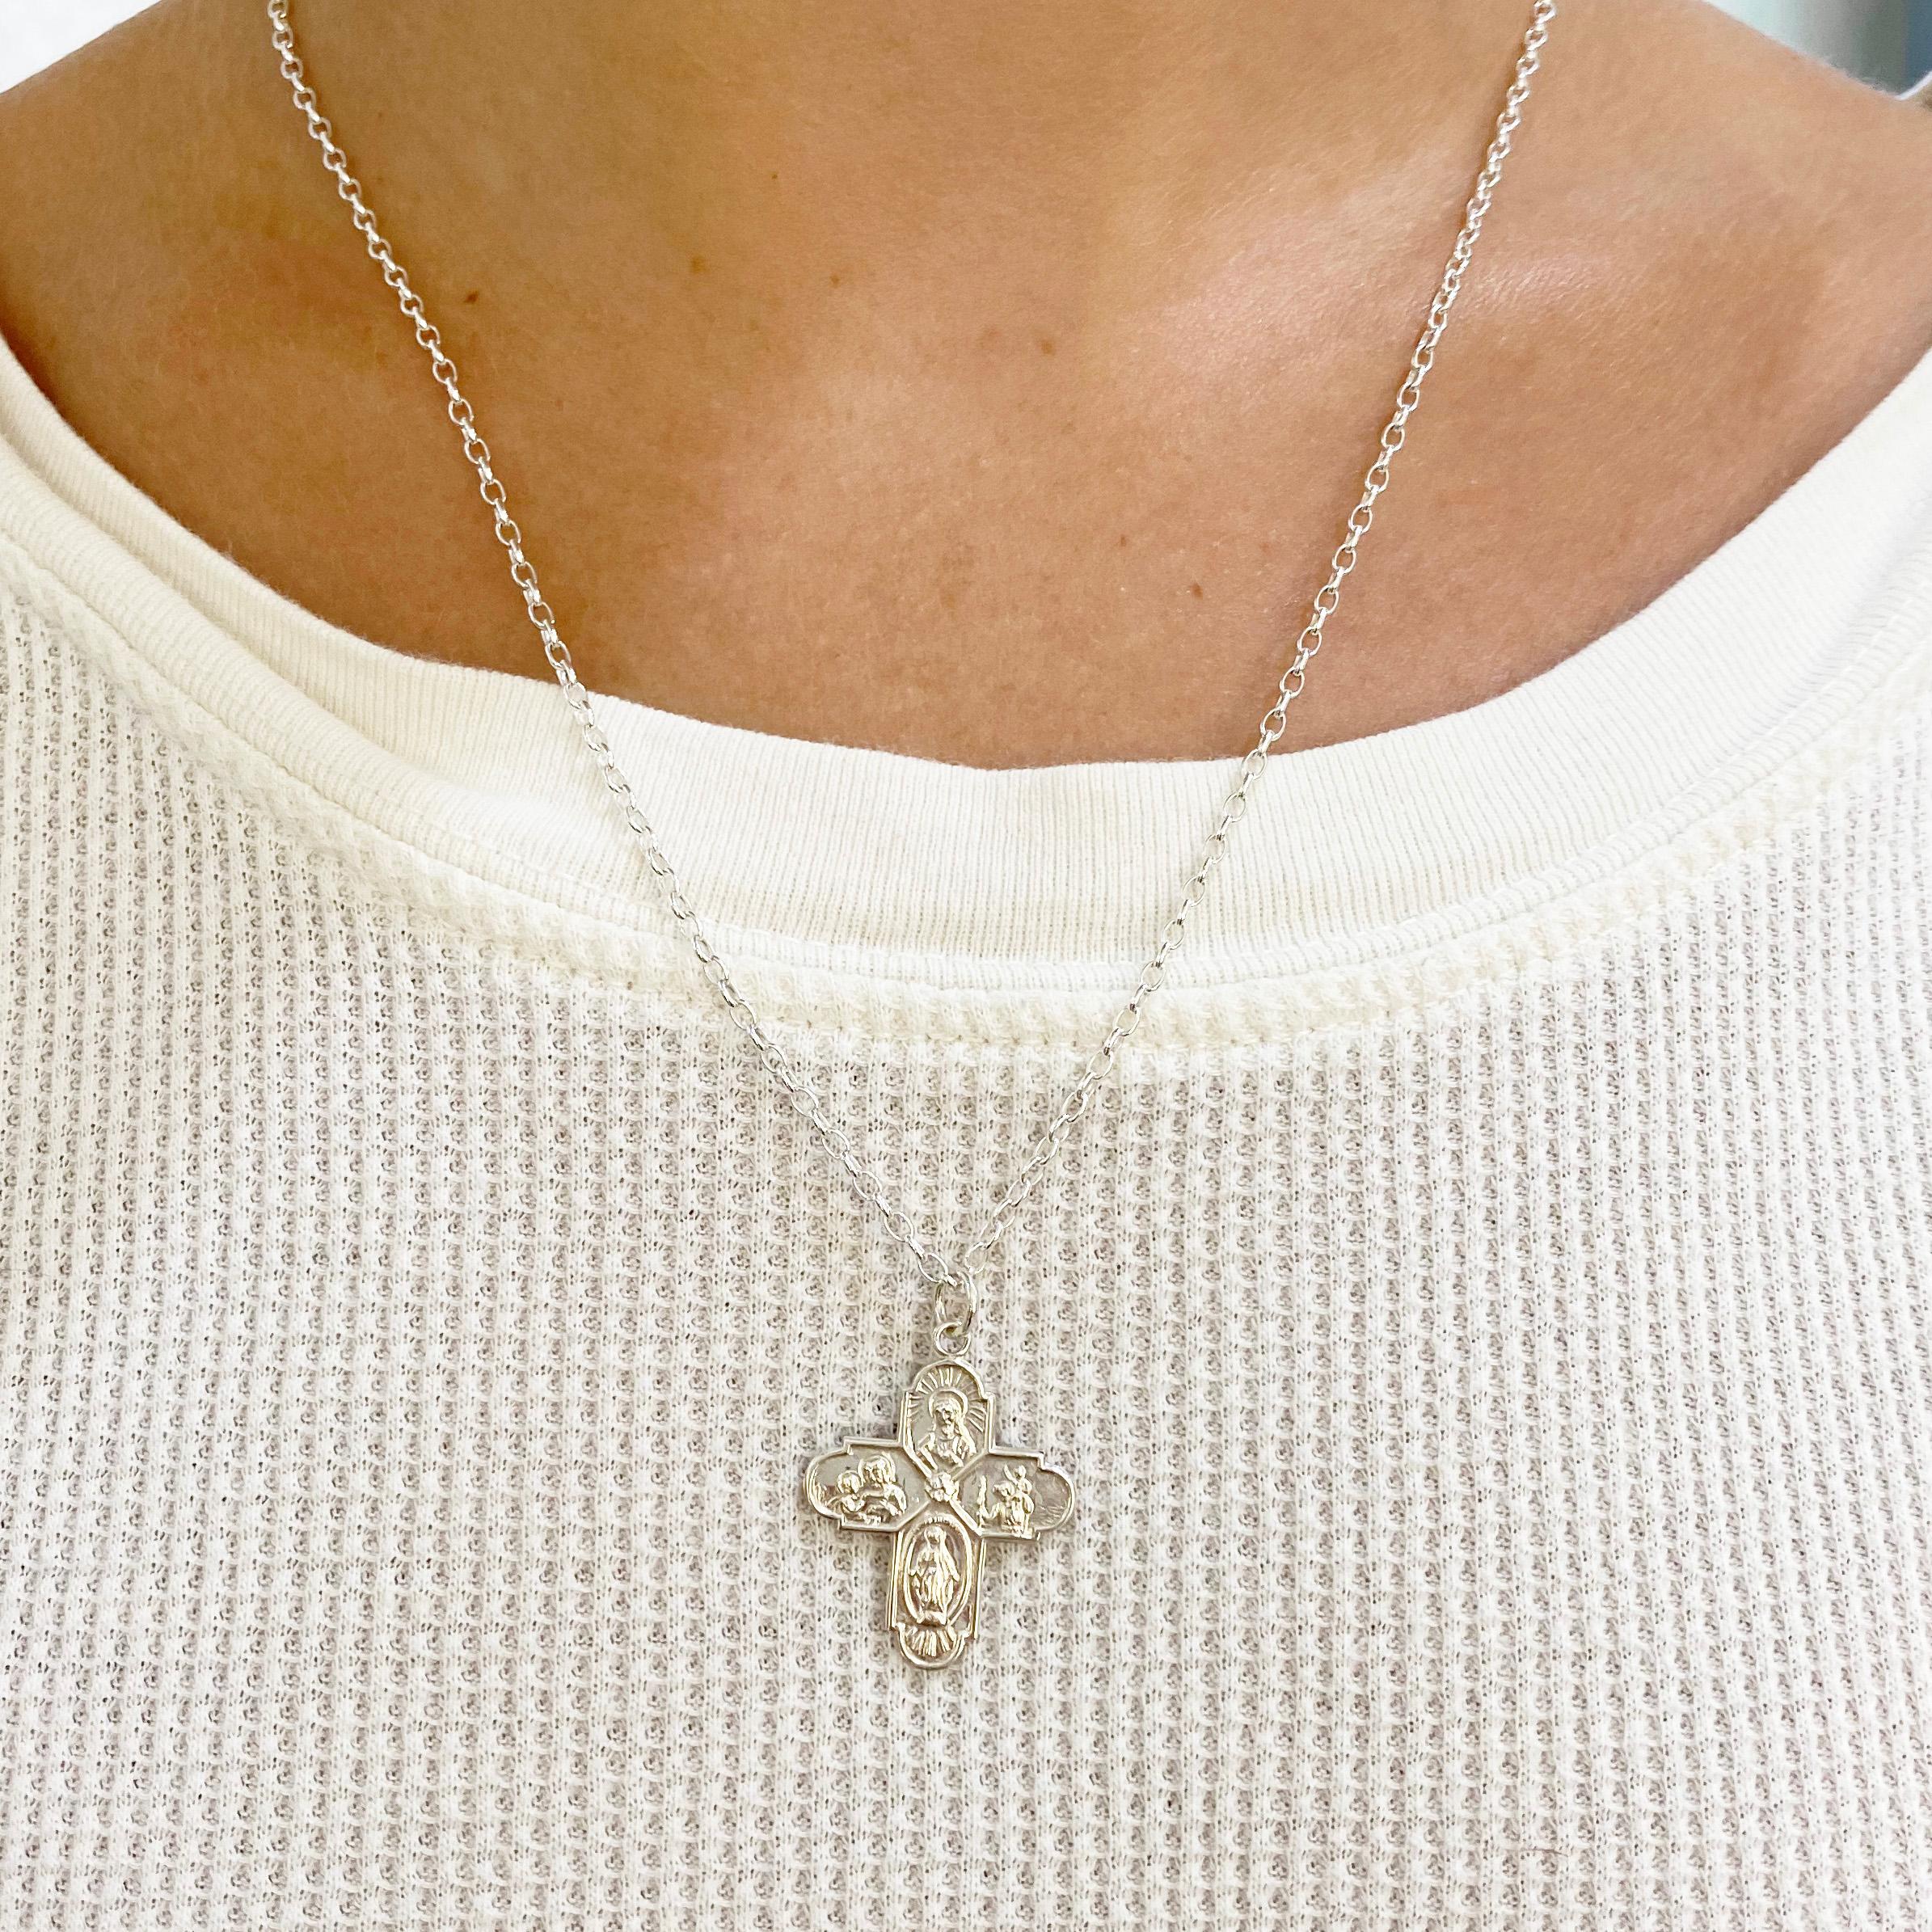 Women's or Men's Miraculous Cross Necklace Sterling Silver Four Way Pendant Cross, Religious